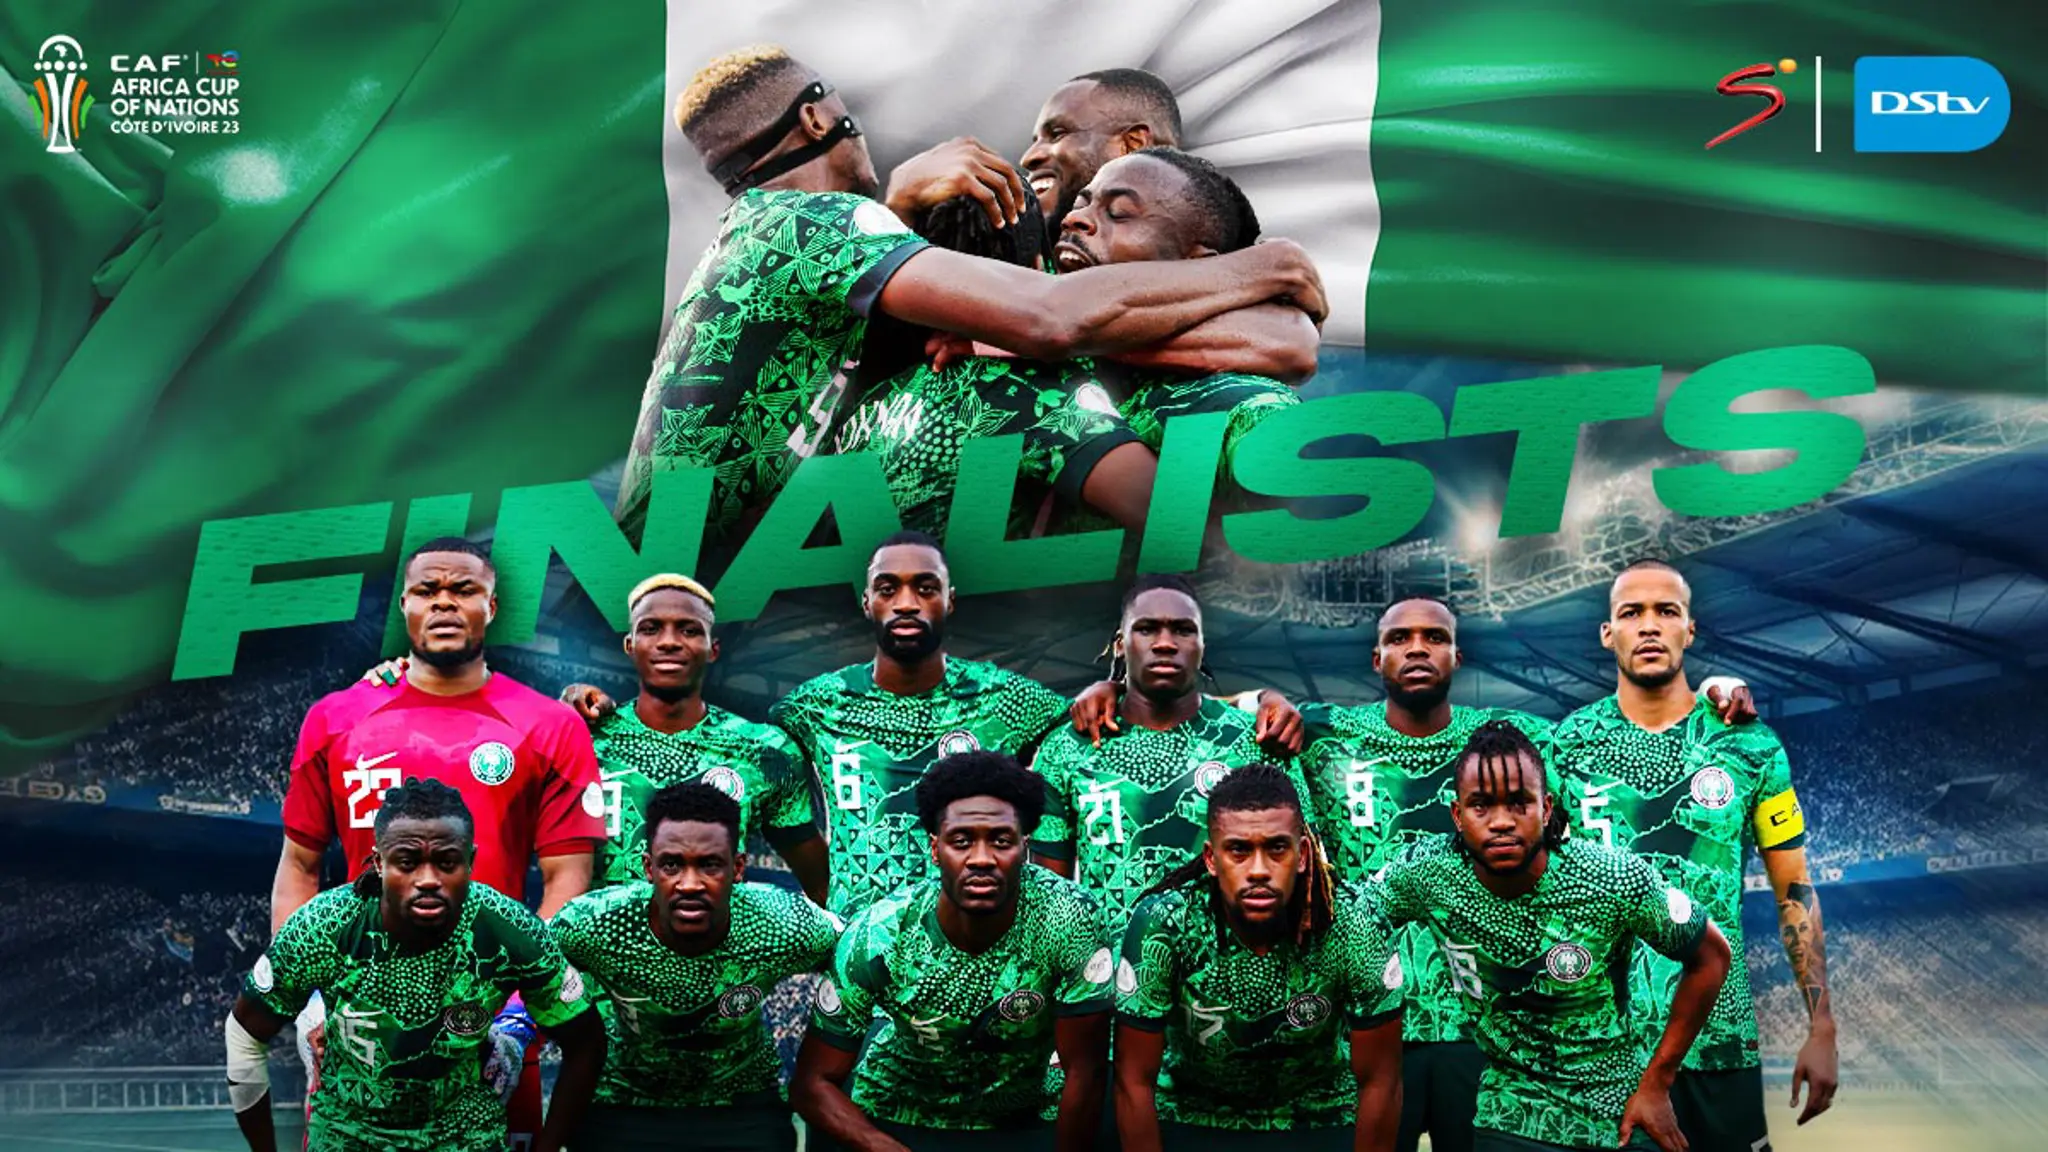 BREAKING: Nigeria beat South Africa to reach AFCON finals